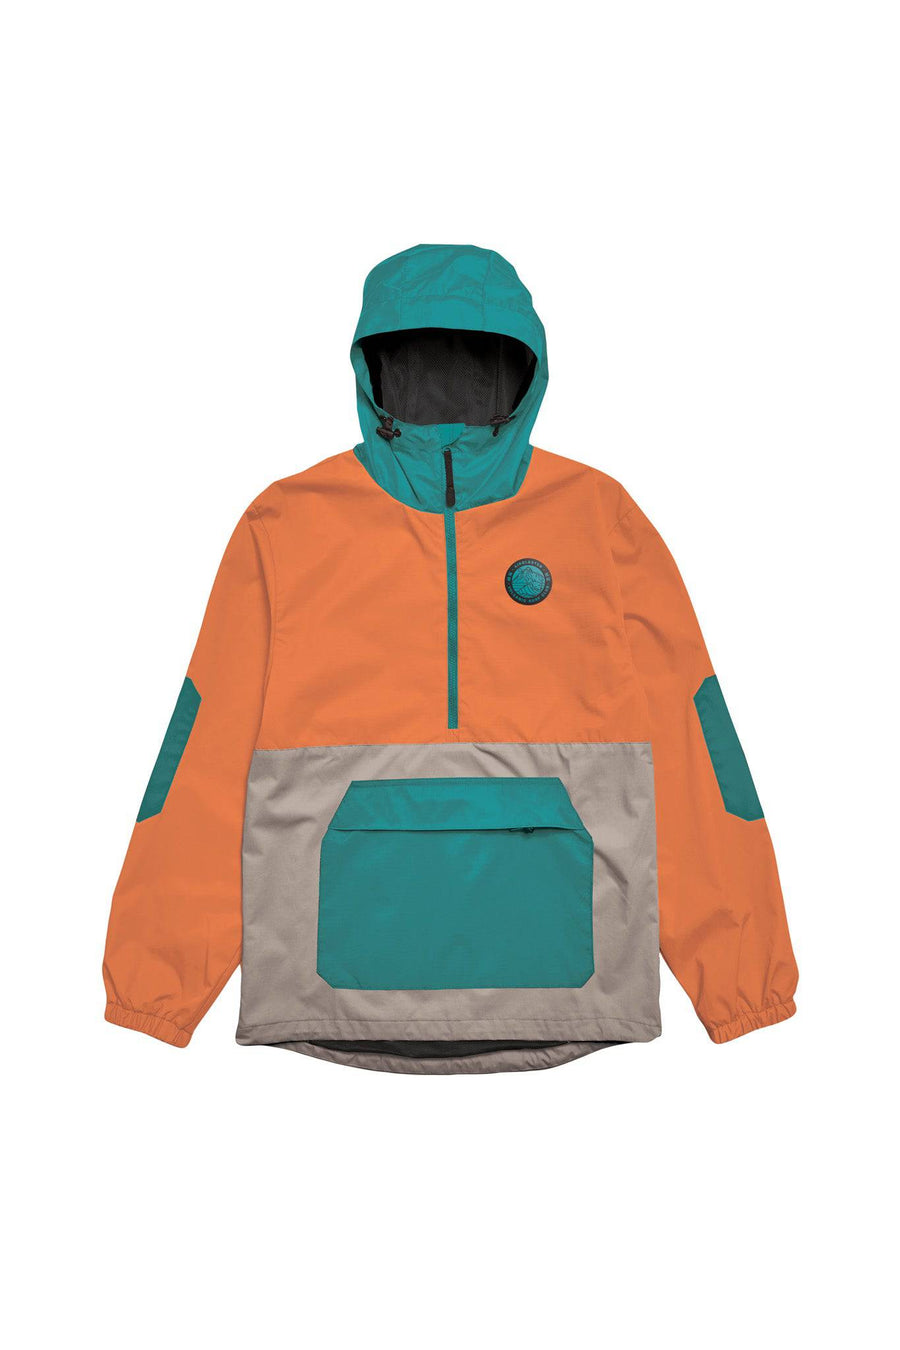 Airblaster Breakwinder Packable Pullover Jacket in Oxide and Teal 2023